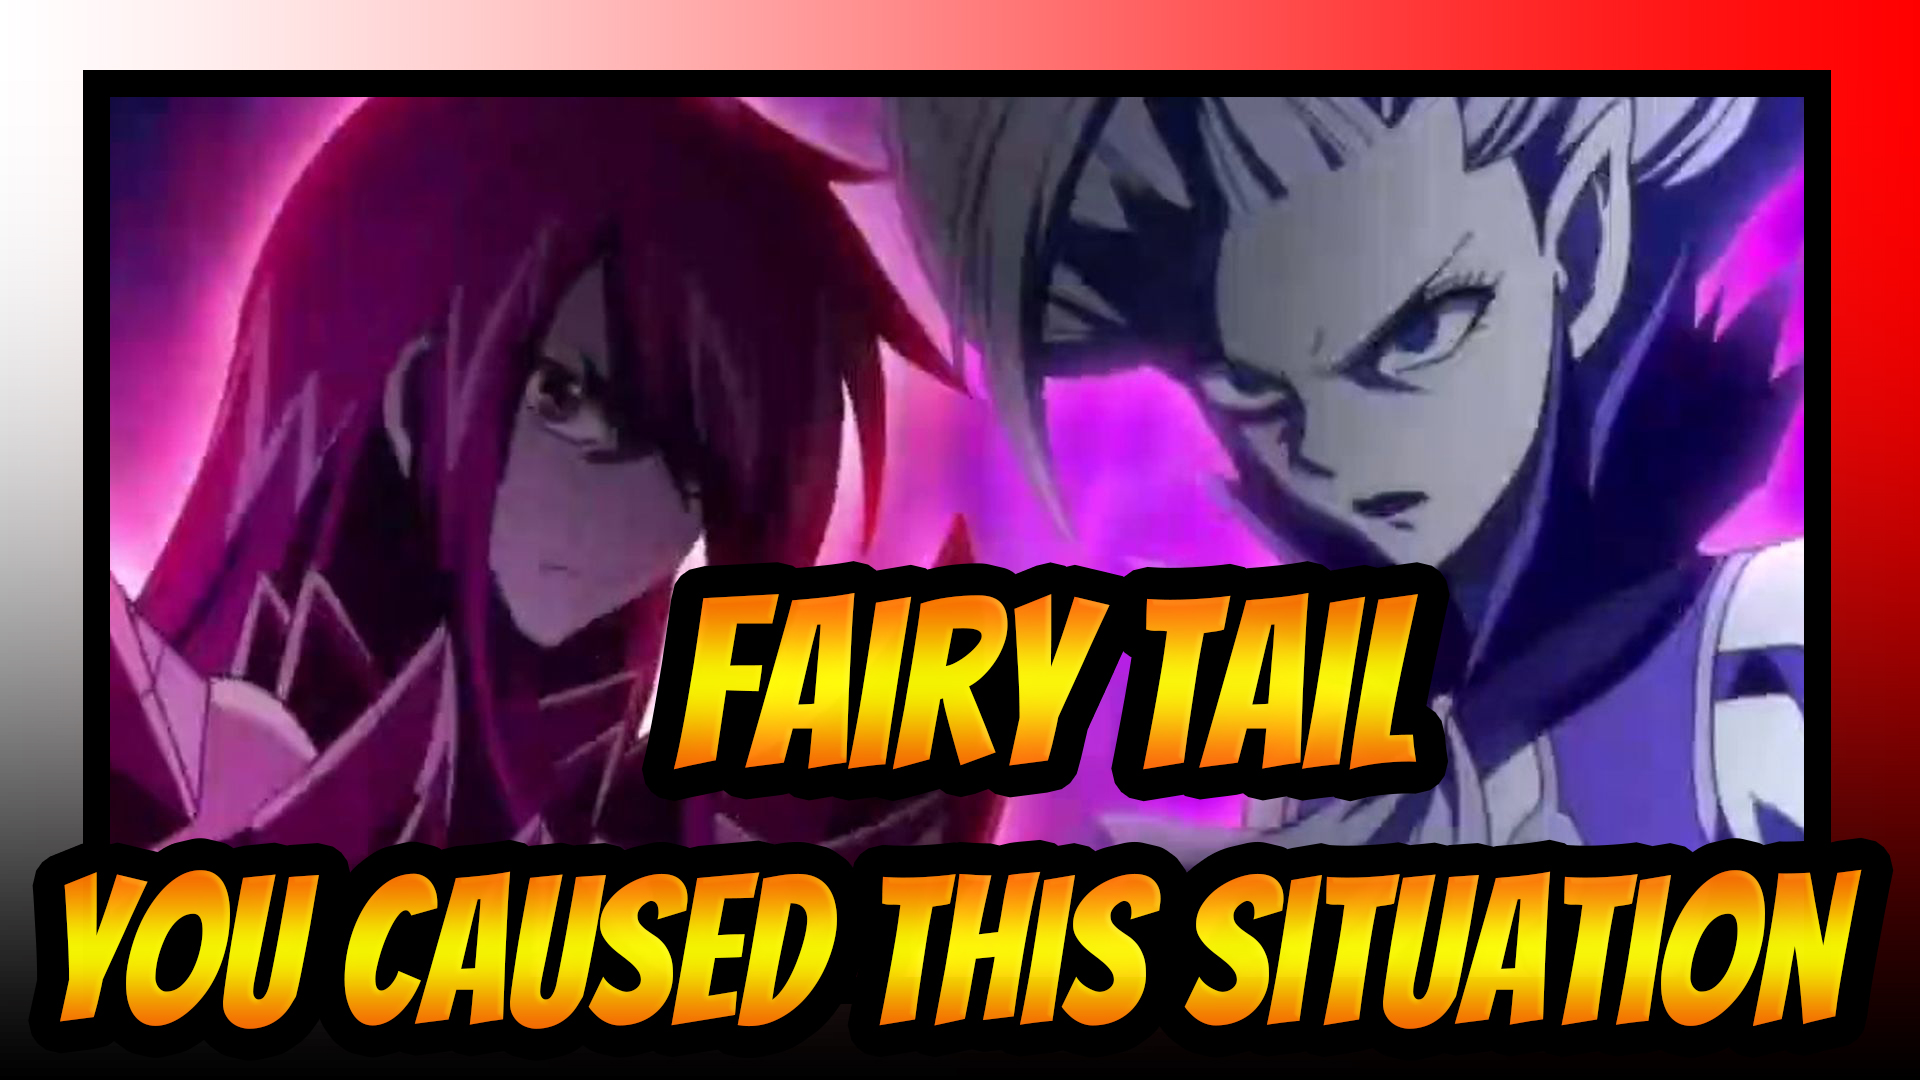 download subtitle indonesia fairy tail.srt